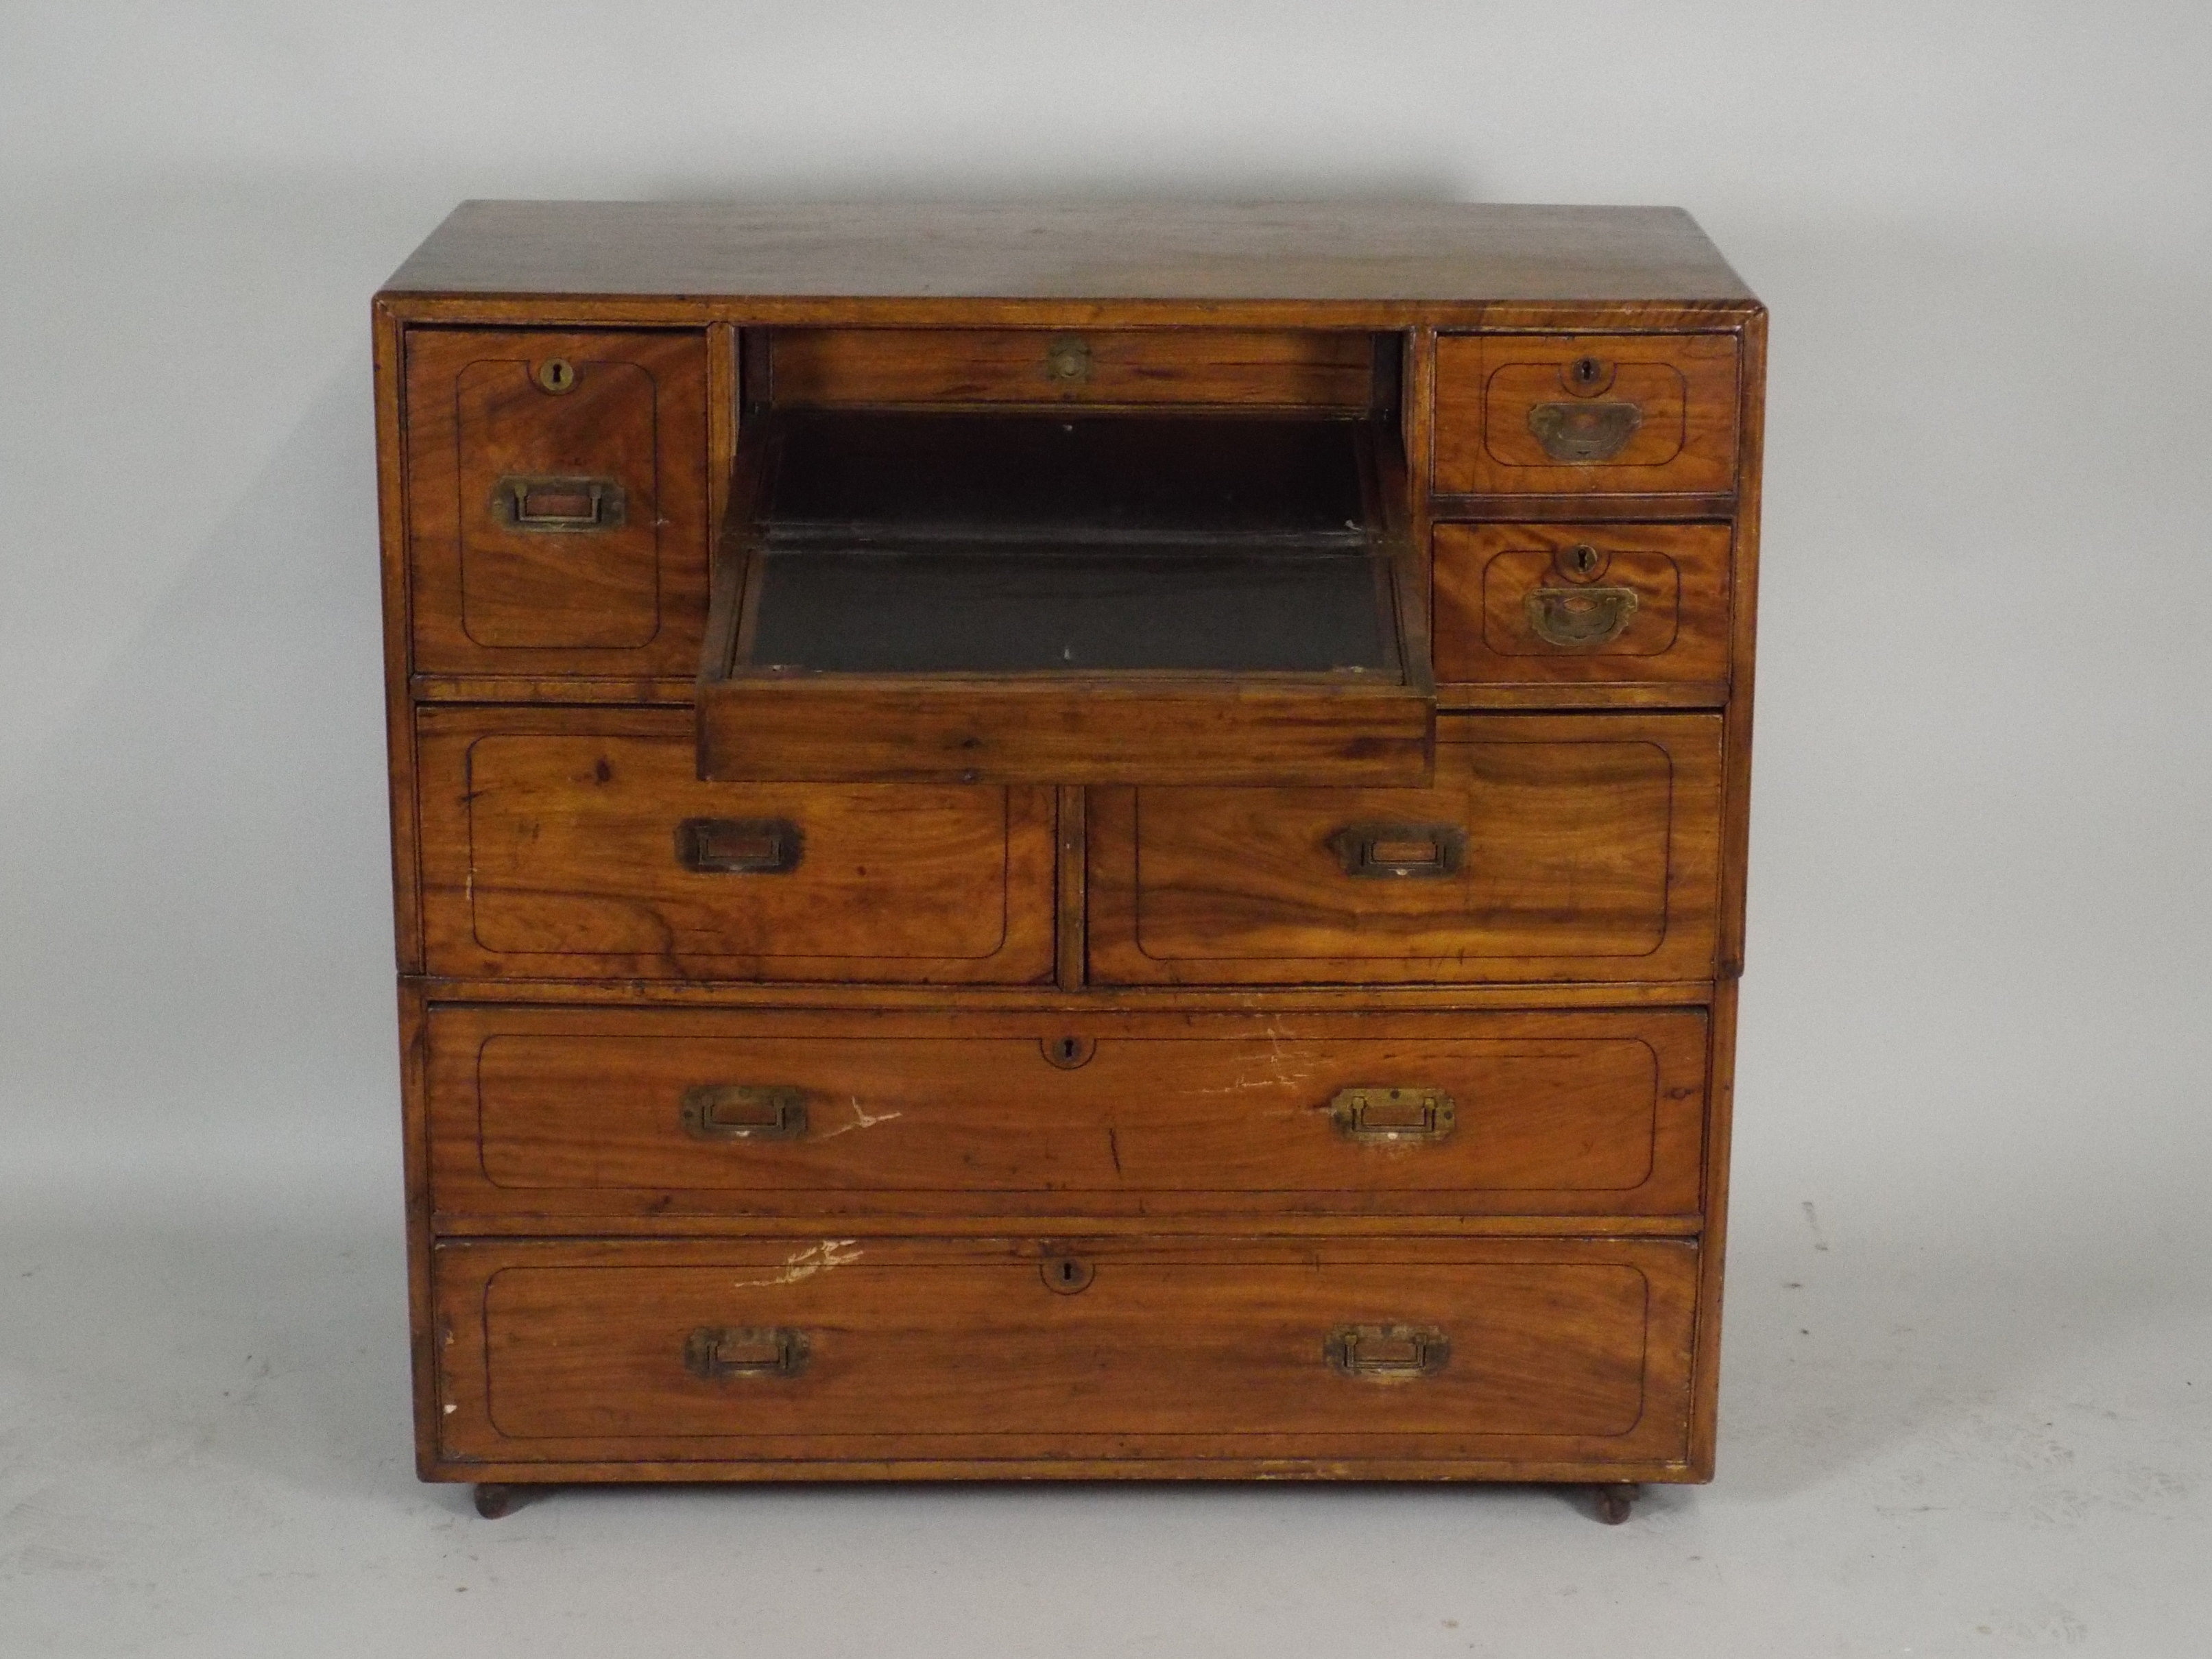 A 19th century teak campaign style desk/chest, the rectangular top with rounded edges over a central - Image 2 of 2